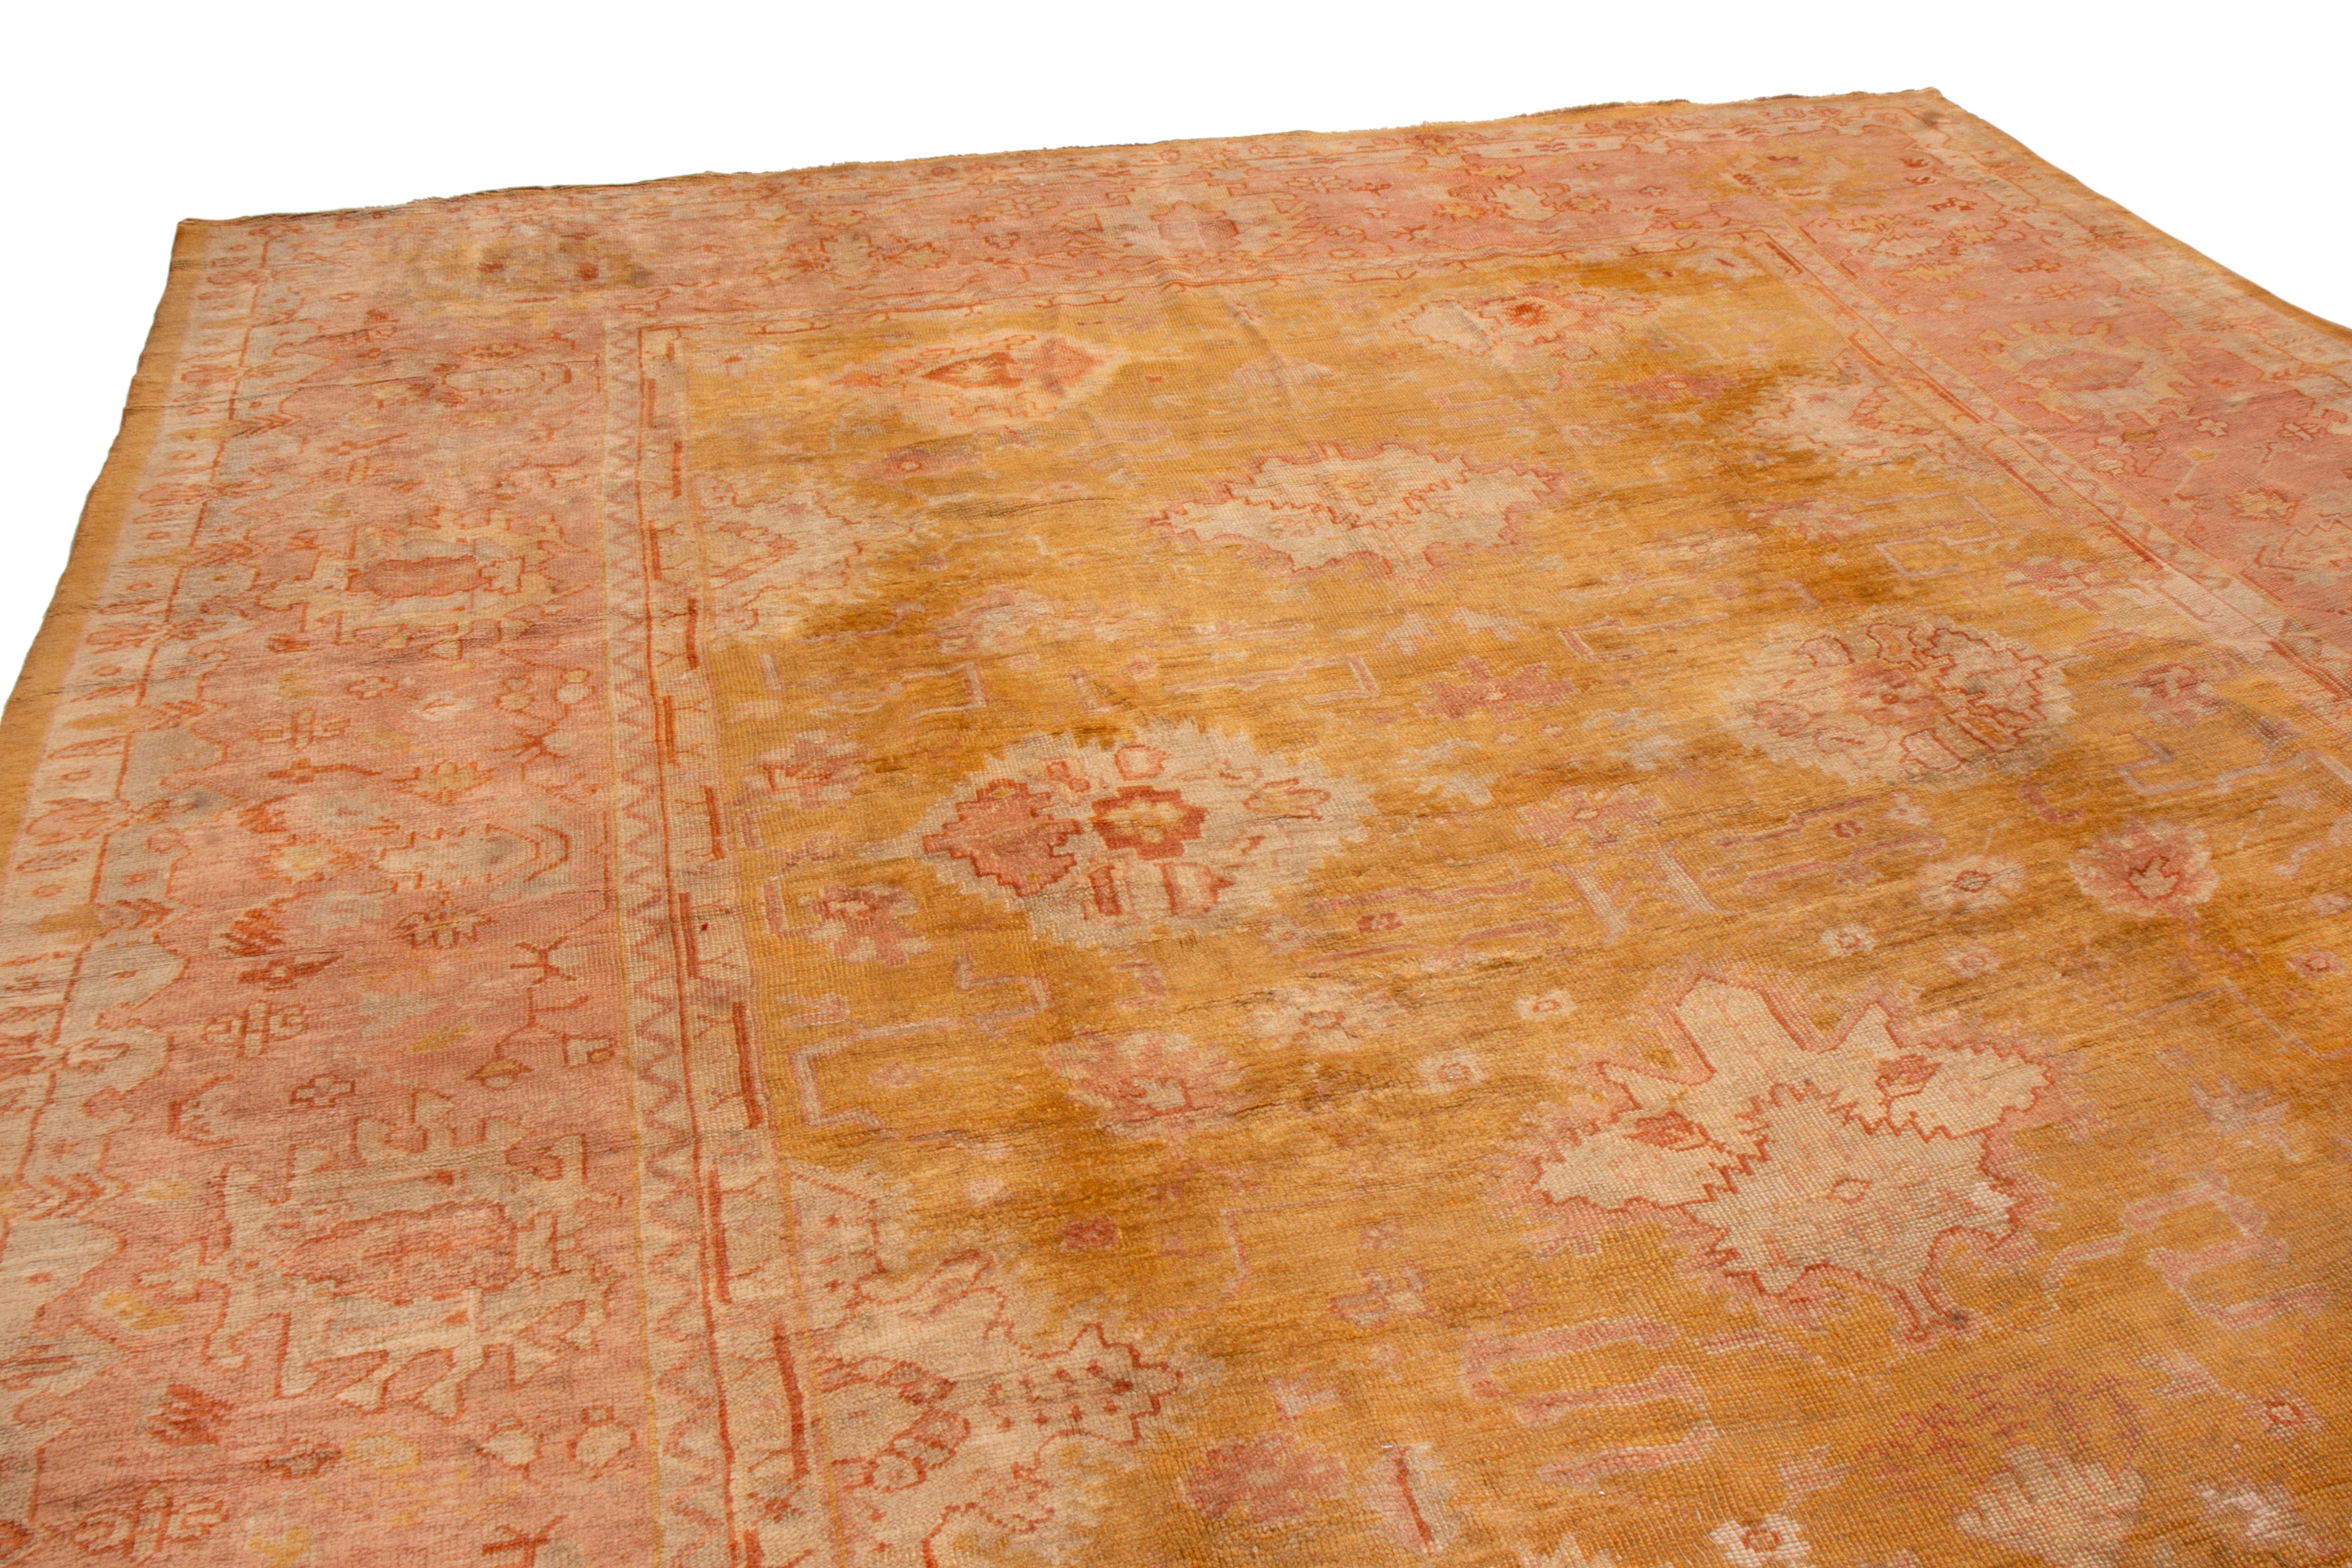 From 1900, this turn-of-the-century antique Oushak wool rug has geometric all-over patterns. The wide, highly stylized border is an atypically modern influence for a piece of the era, as is the combination of golden-orange, pinkish-red, and muted